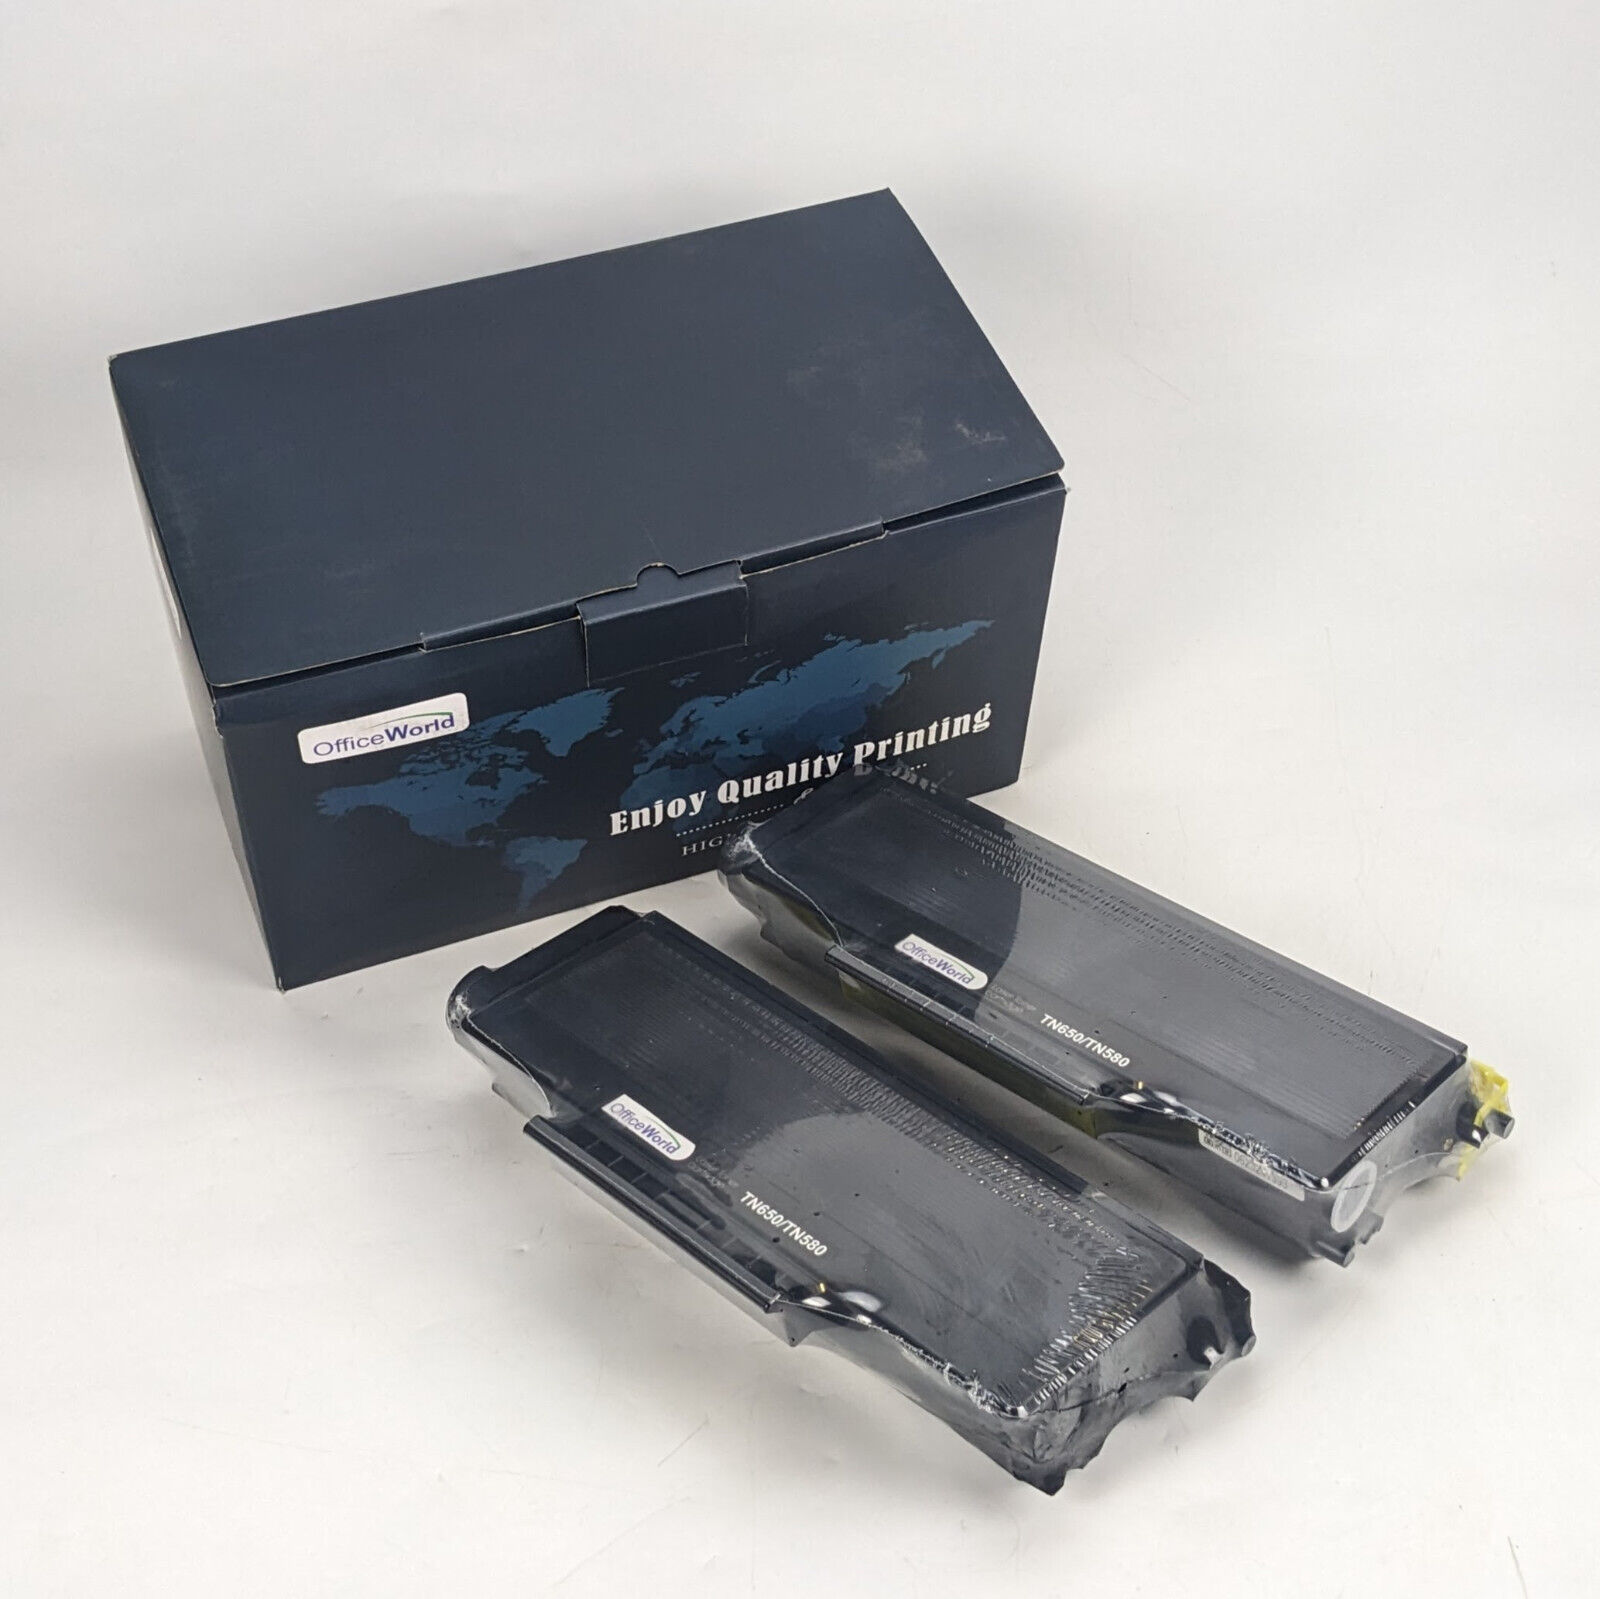 2-PACK Office World Brother TN650 / TN580 Compatible Black Toner Cartridge